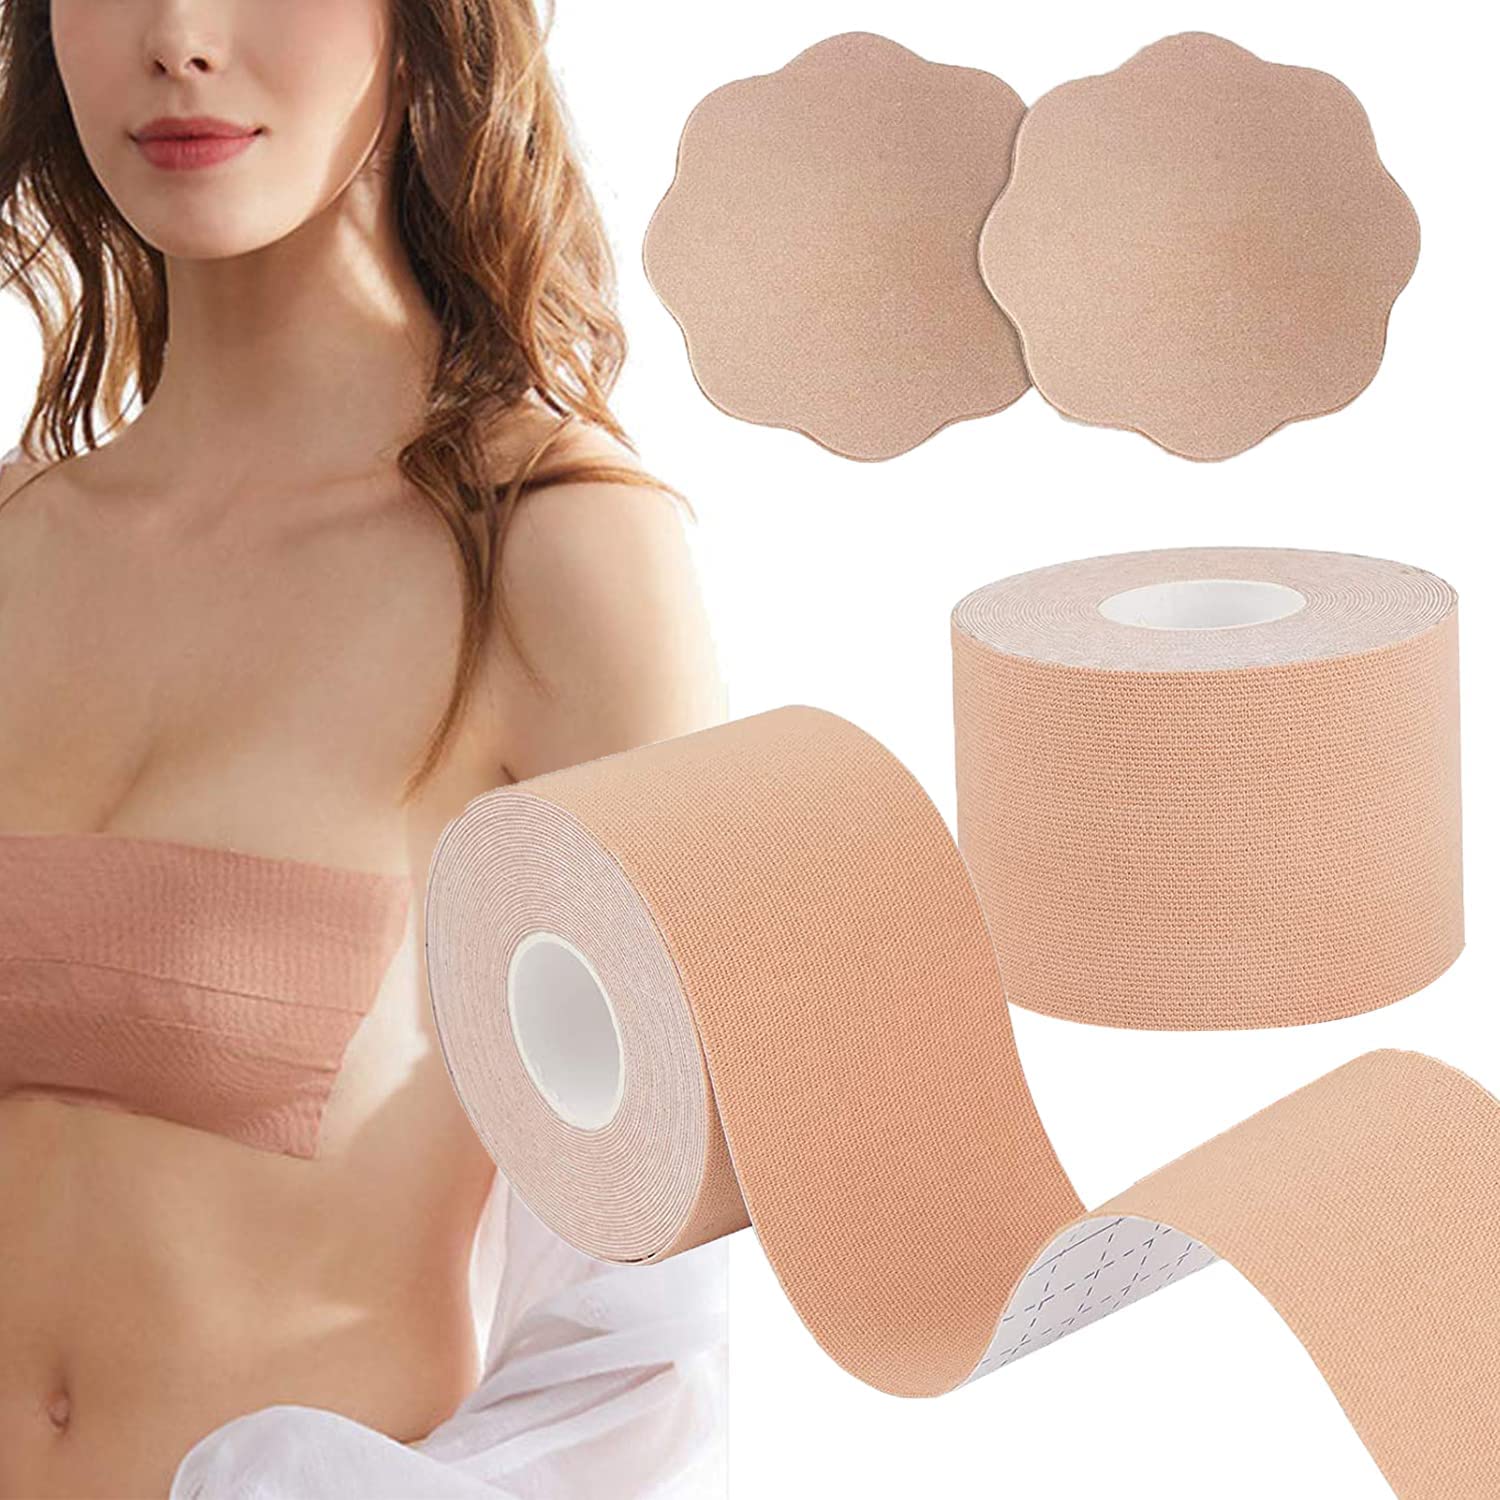 How to choose a boob tape?